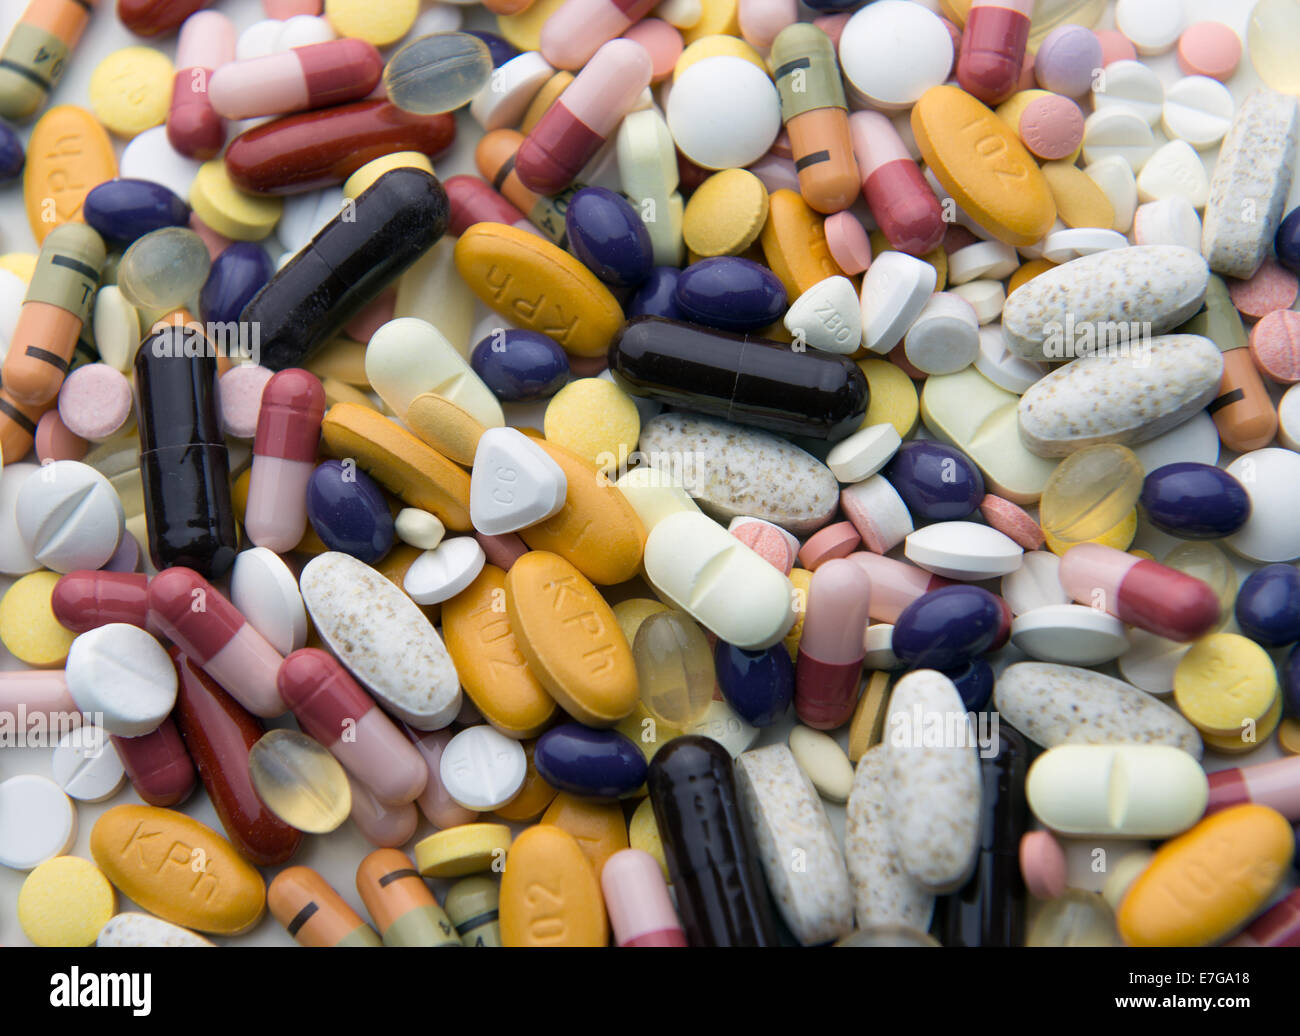 Tablets and pills on a table, 18 August 2014 in Hamburg. Stock Photo